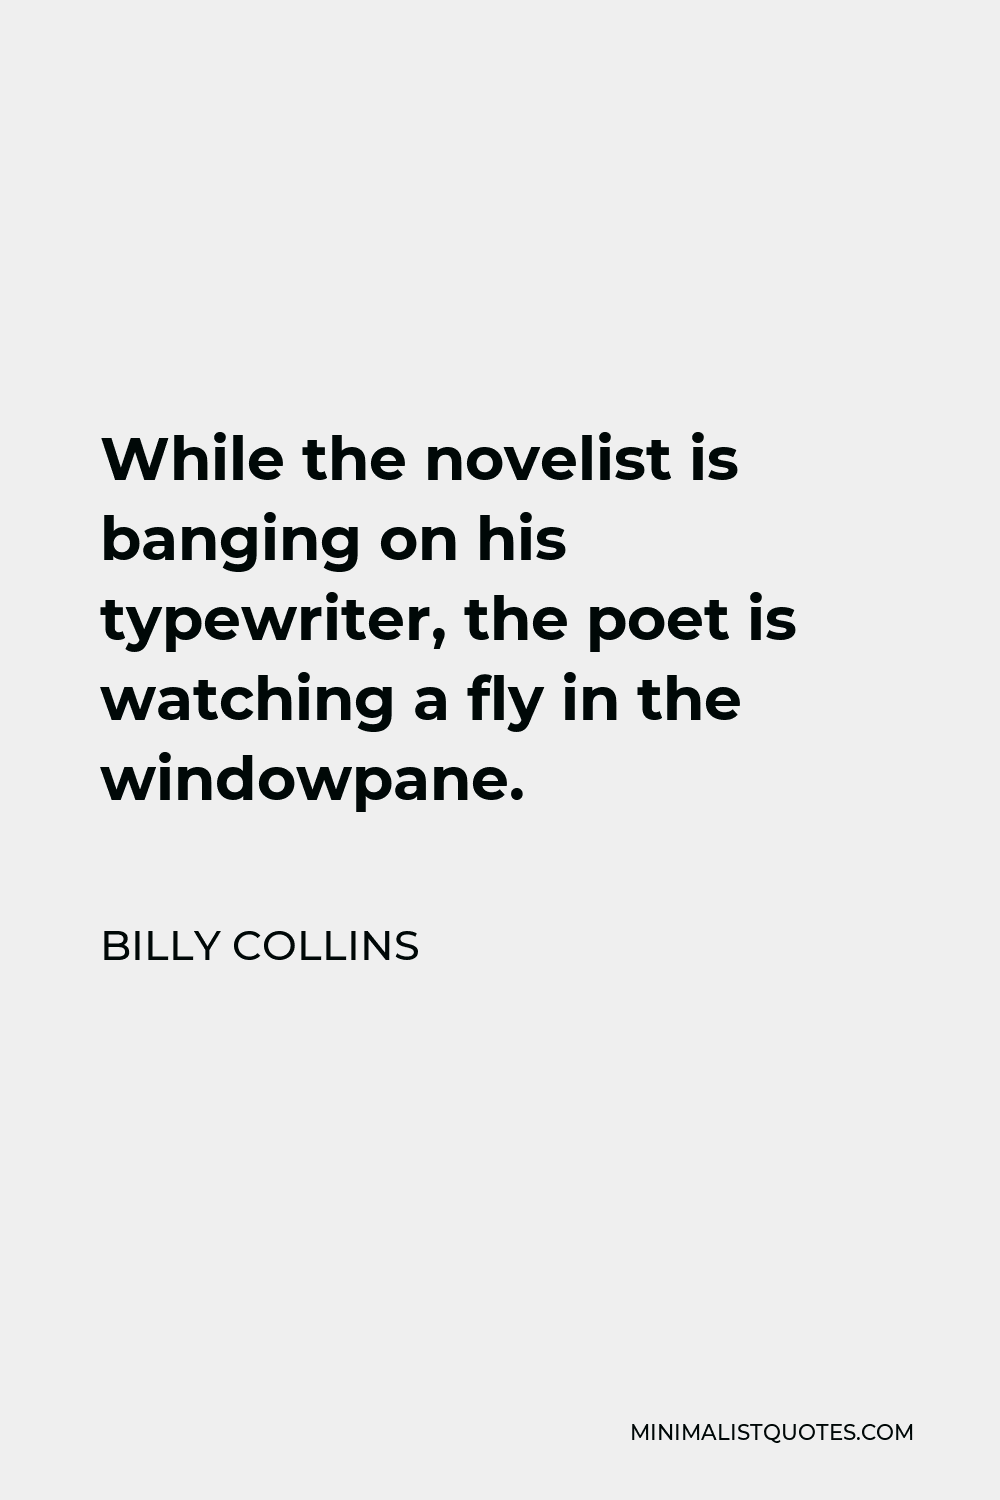 Billy Collins Quote - While the novelist is banging on his typewriter, the poet is watching a fly in the windowpane.